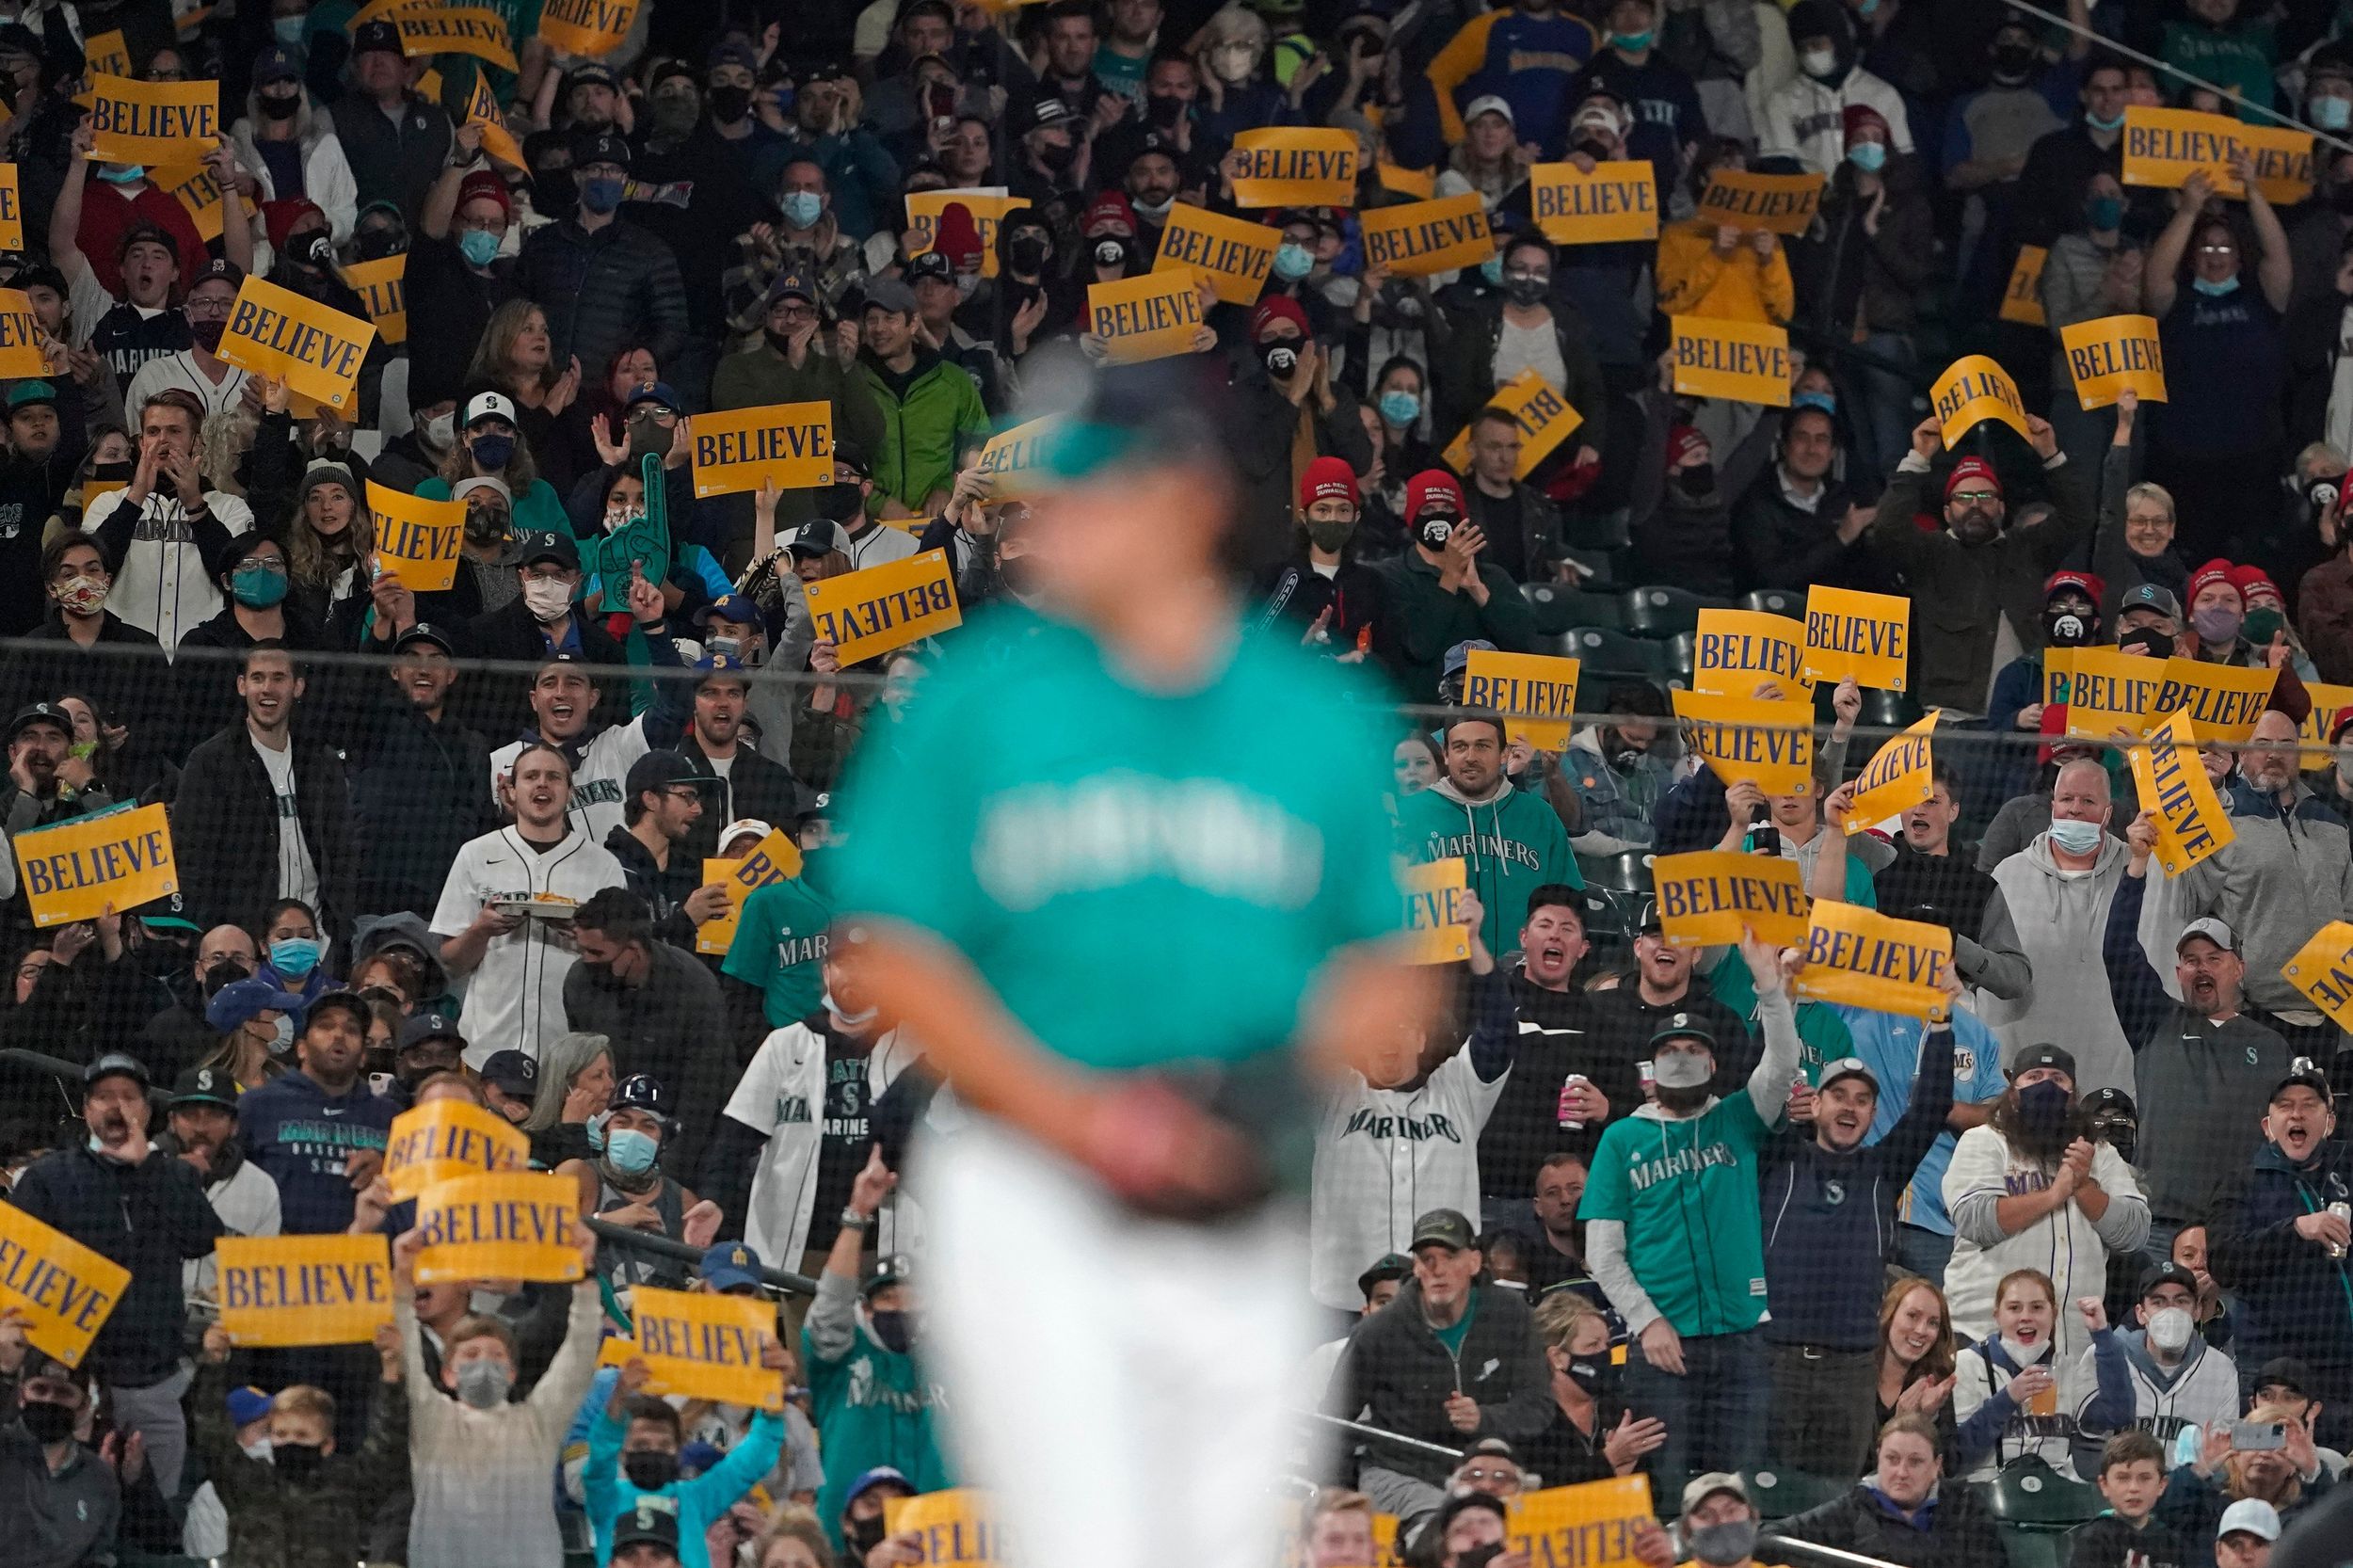 Commentary: To fans dismay, all the Mariners have delivered is